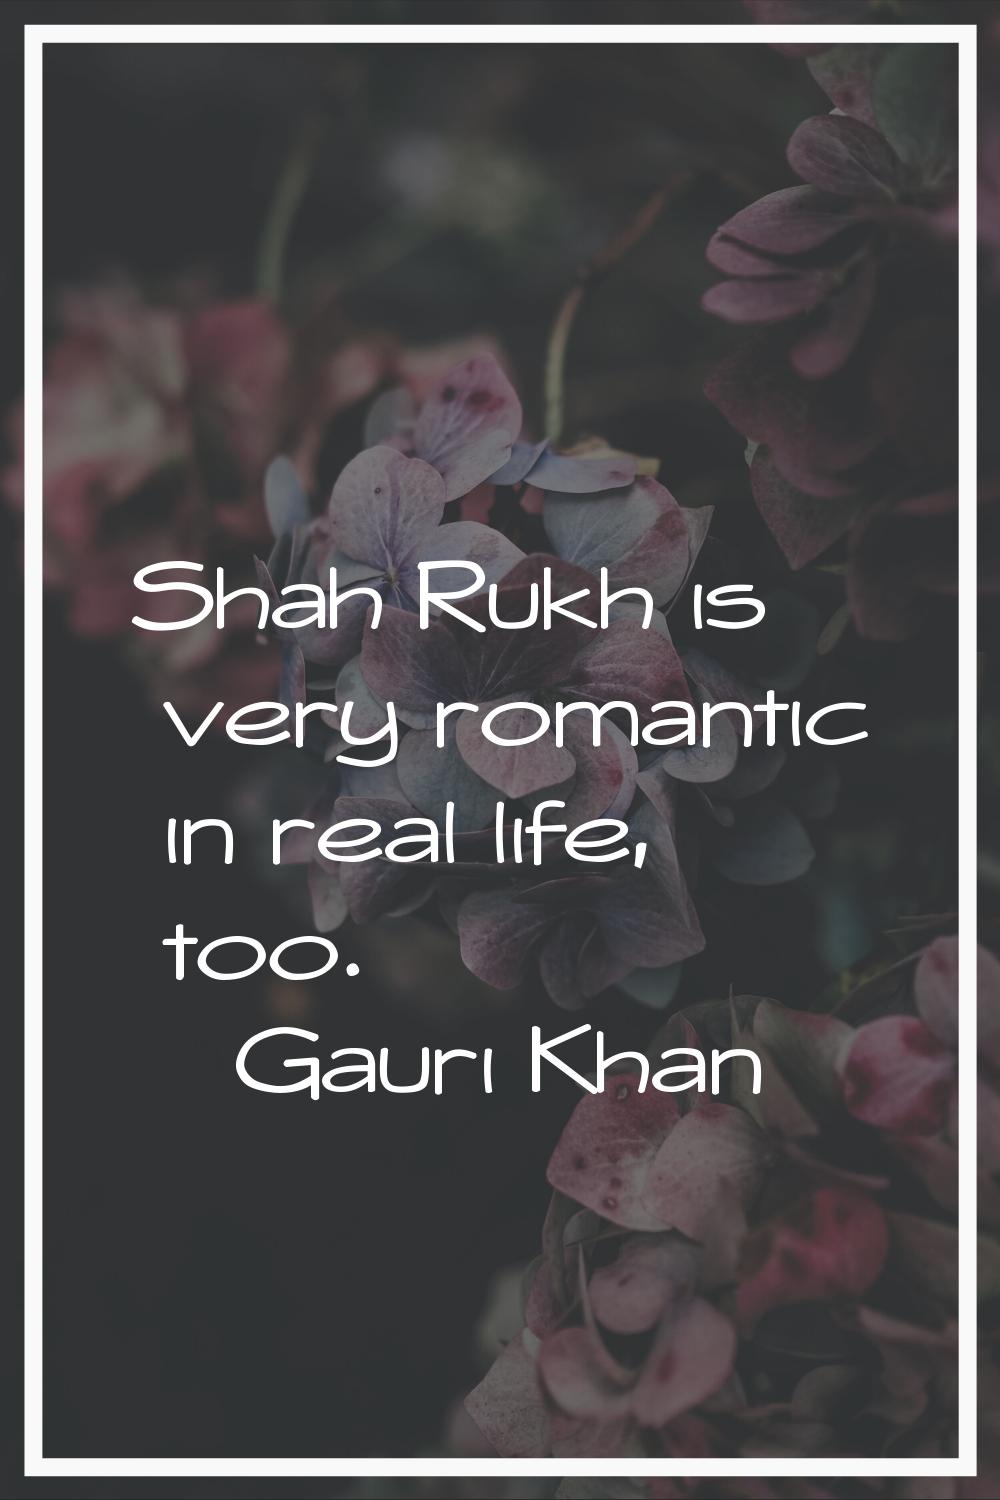 Shah Rukh is very romantic in real life, too.